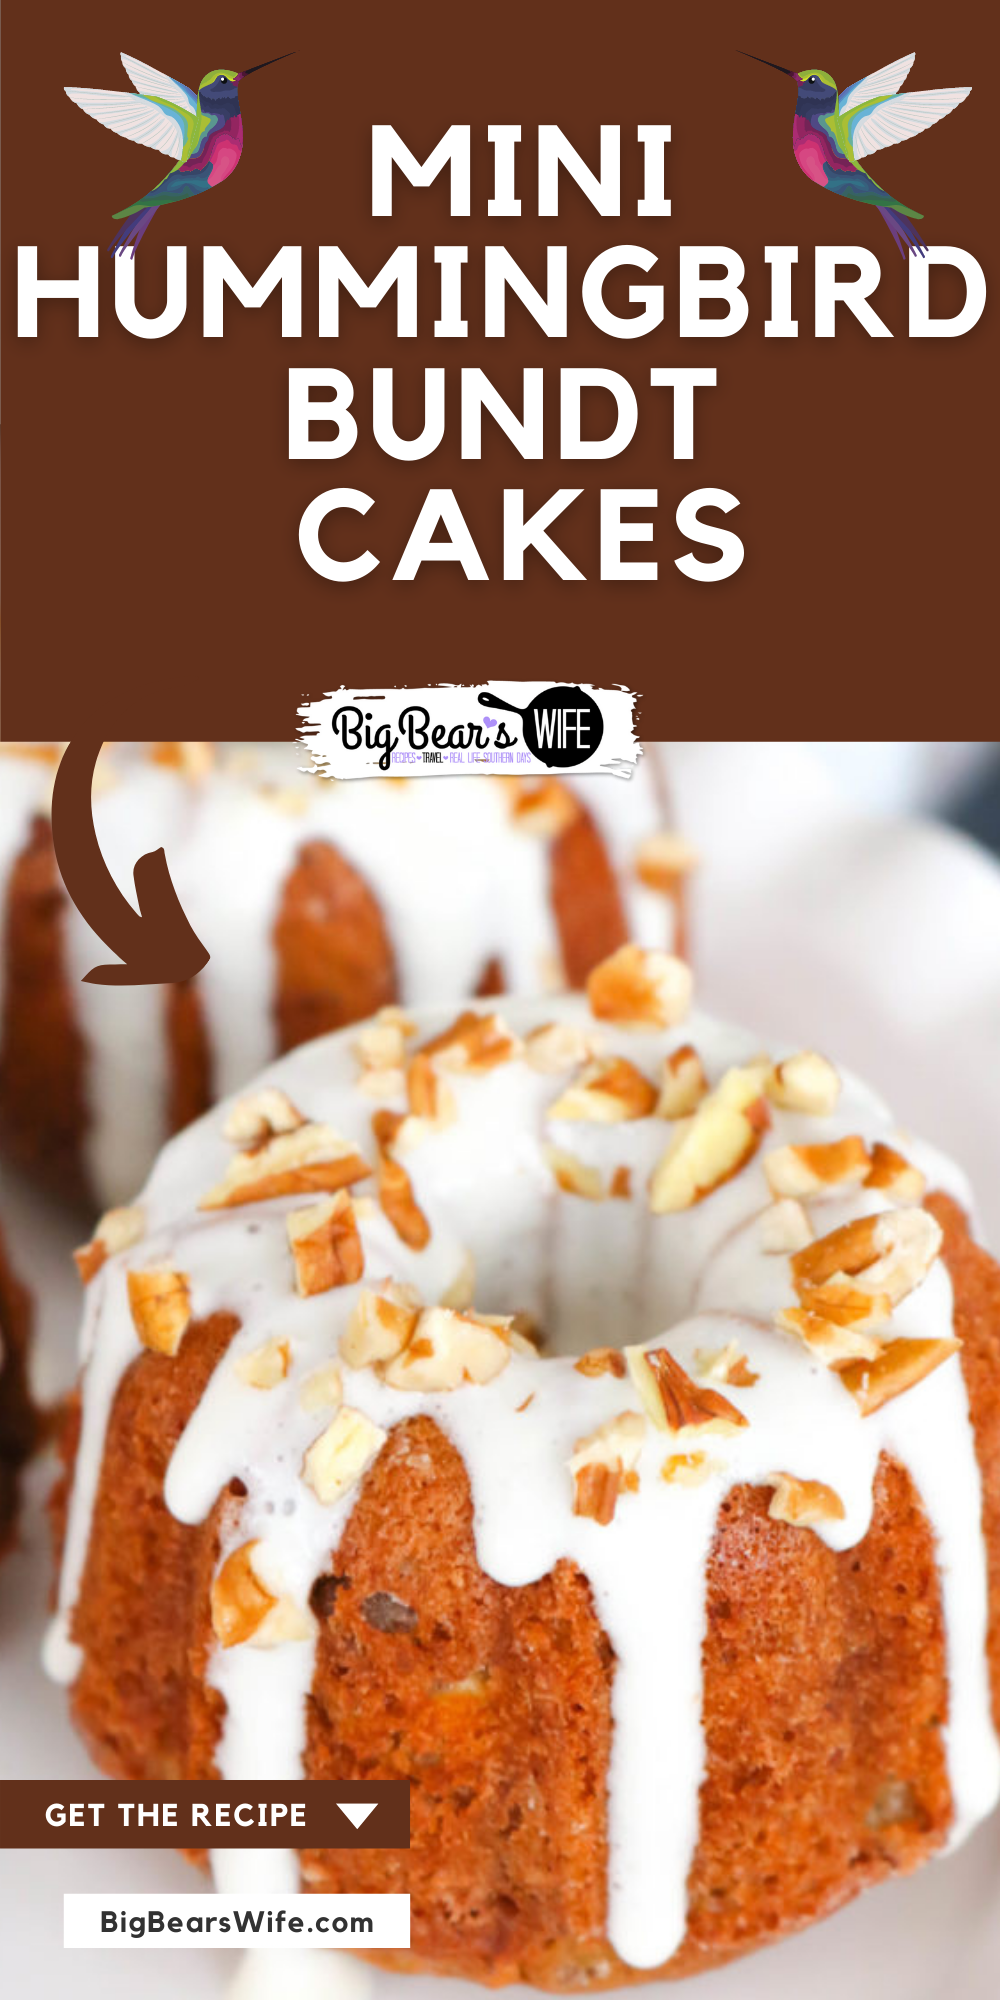 Stuffed with bananas, pecans, and pineapple these Hummingbird Mini Bundt Cakes make for a wonderful Easter dessert, a church potluck or Mother’s Day brunch. This southern classic has been turned into divine individual dessert with a mini bundt pan.  via @bigbearswife